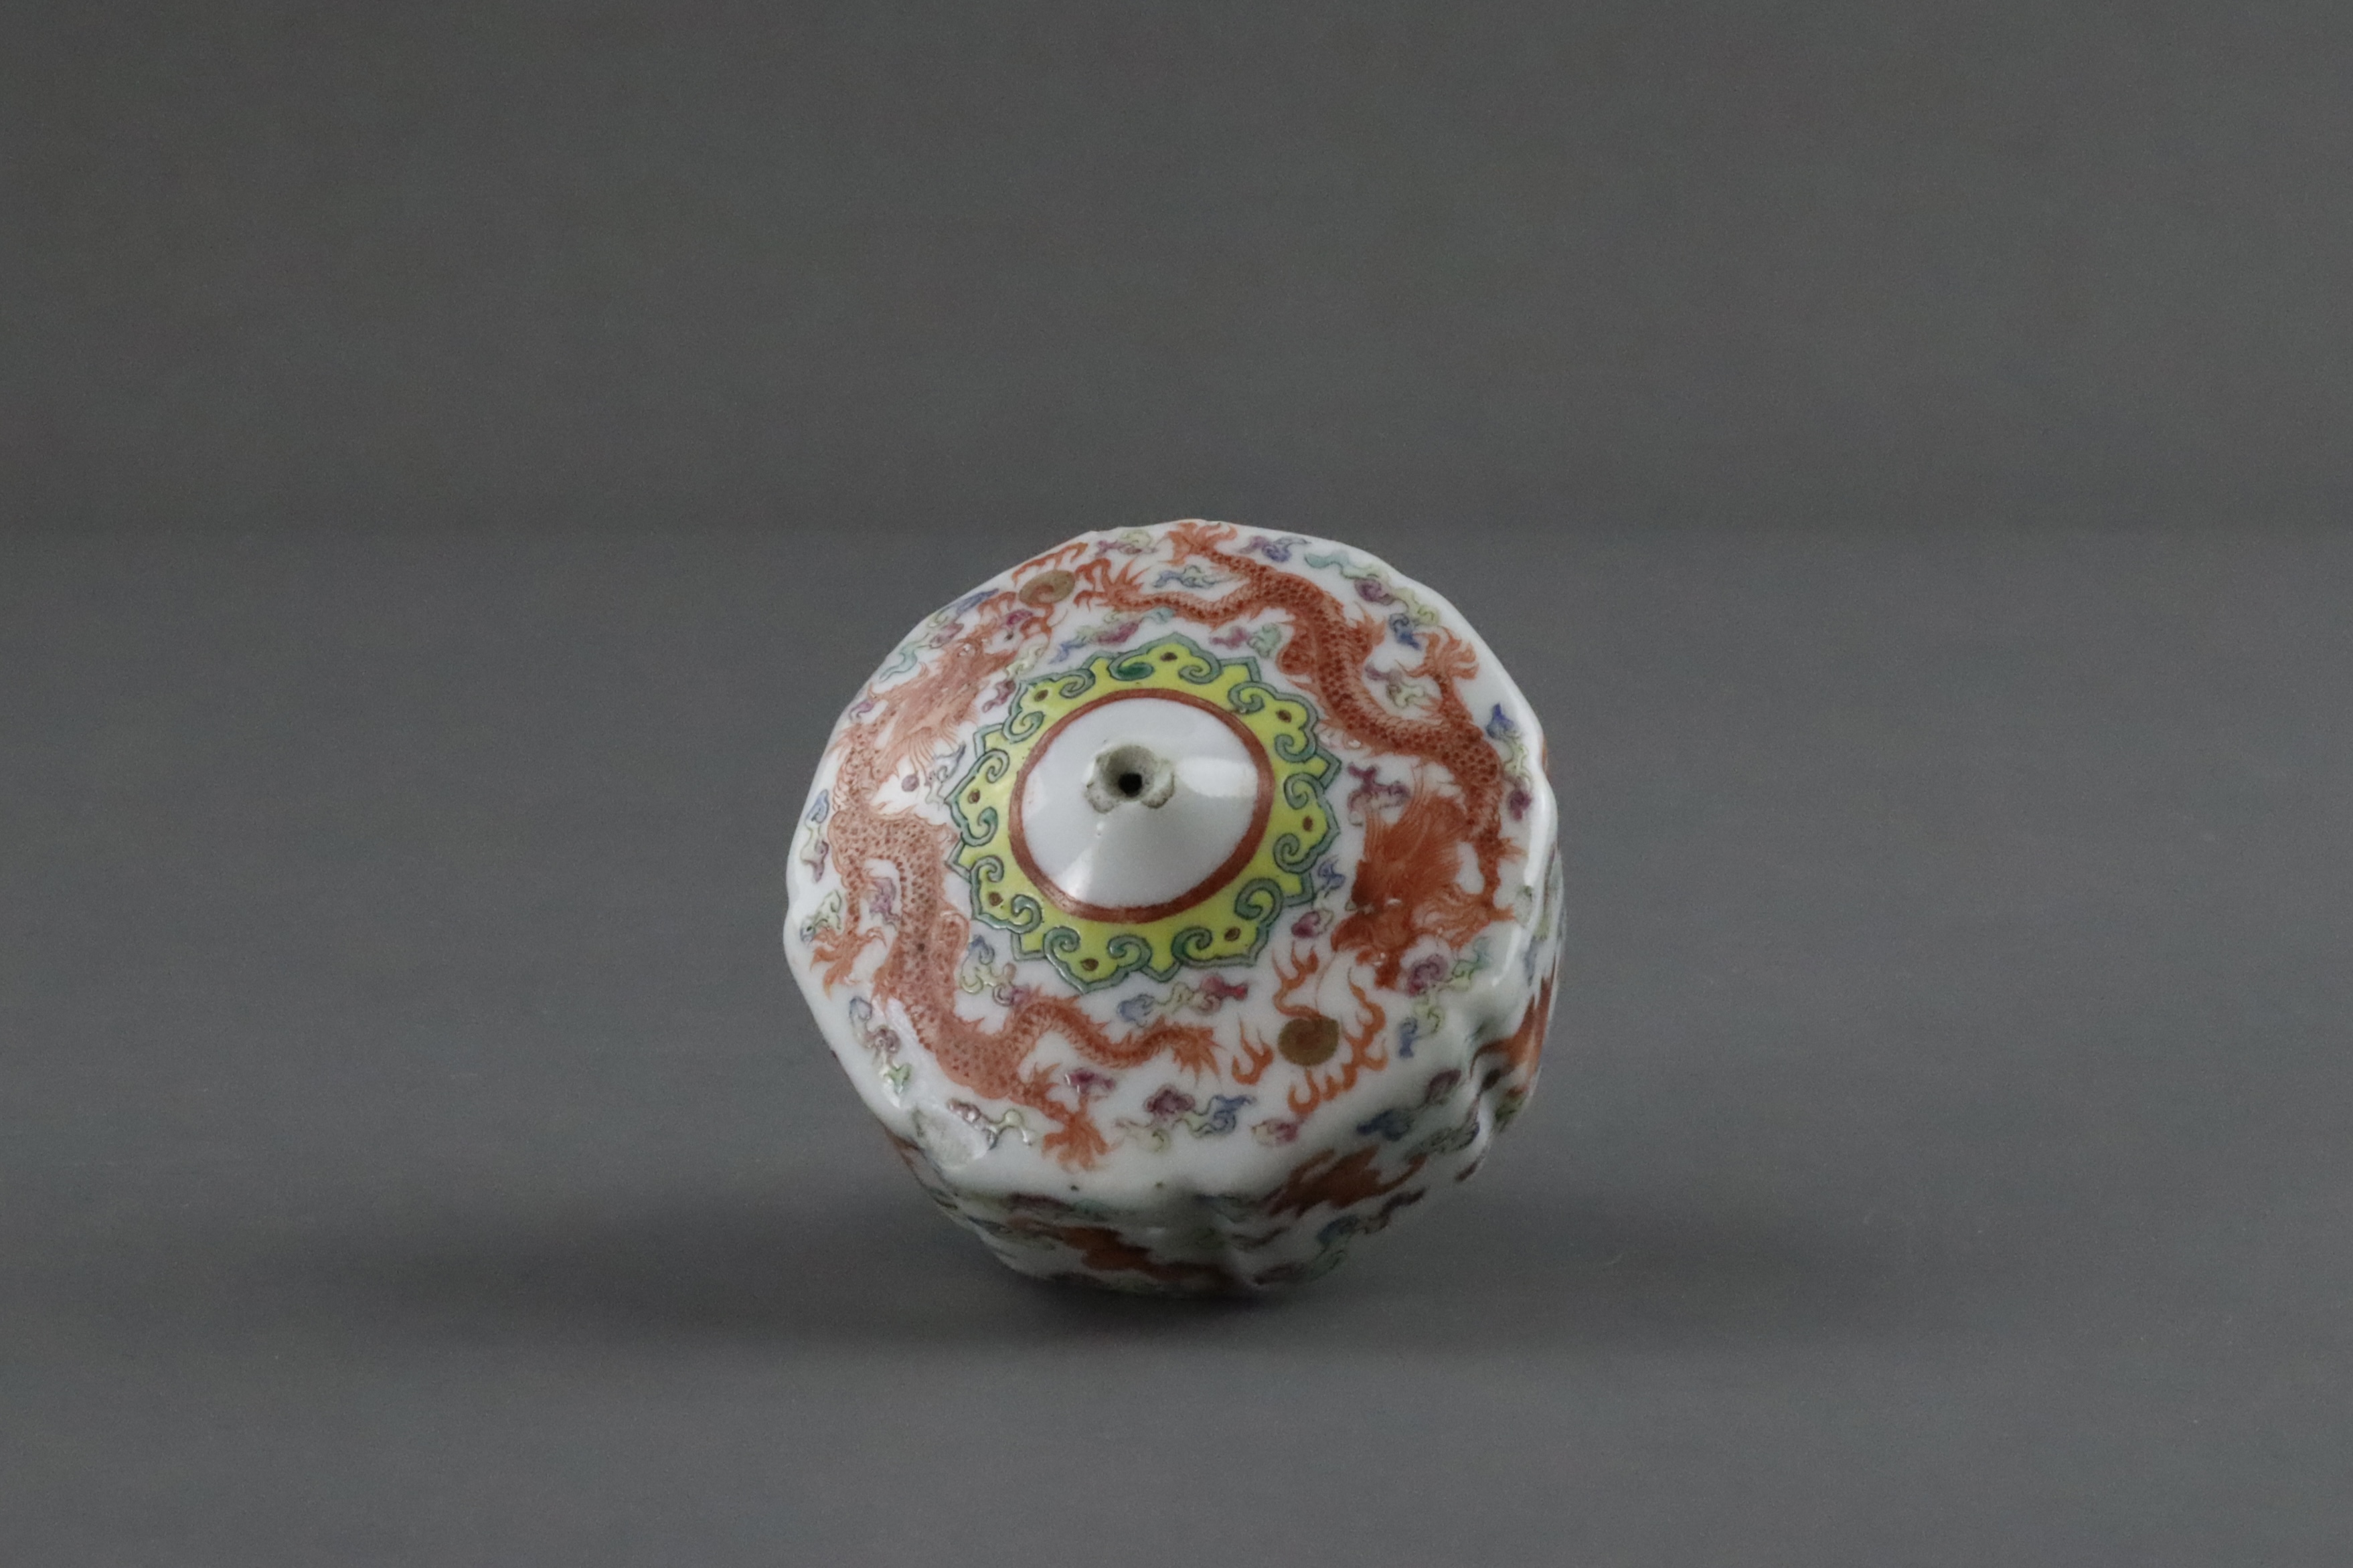 A Rare Porcelain Opium Pipe Bowl, four character mark, 19th century,